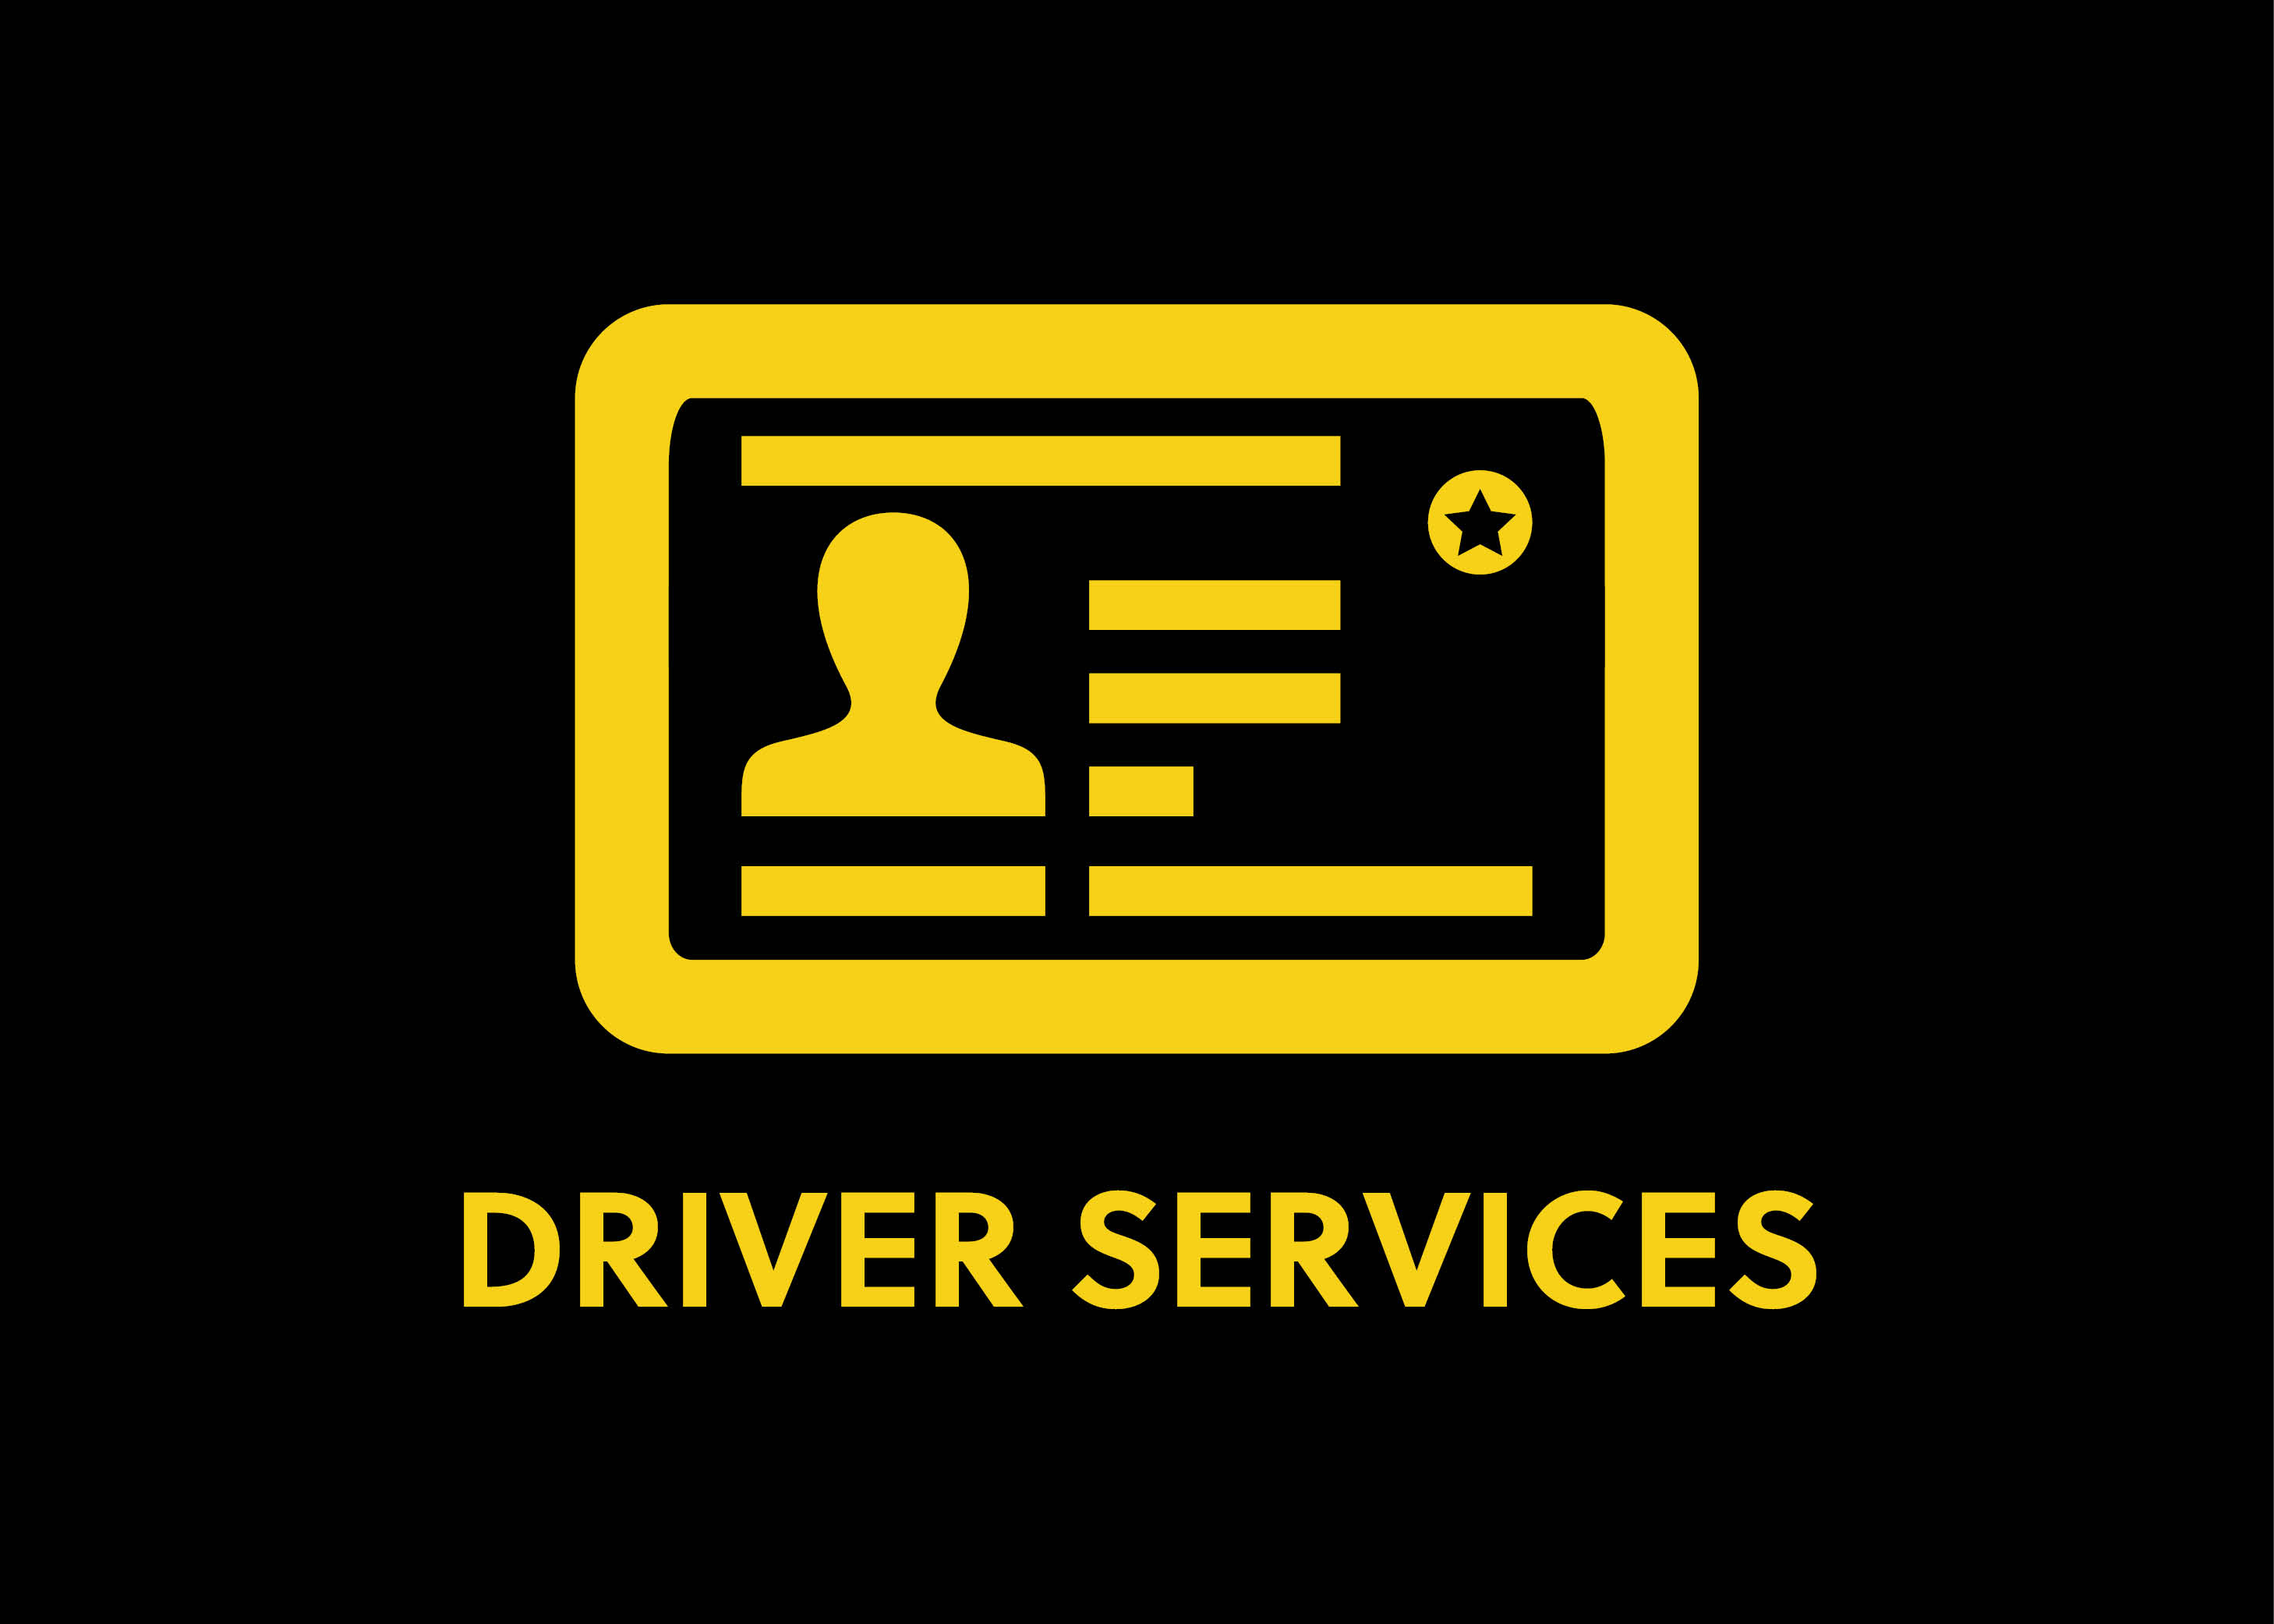 Driver Services Link